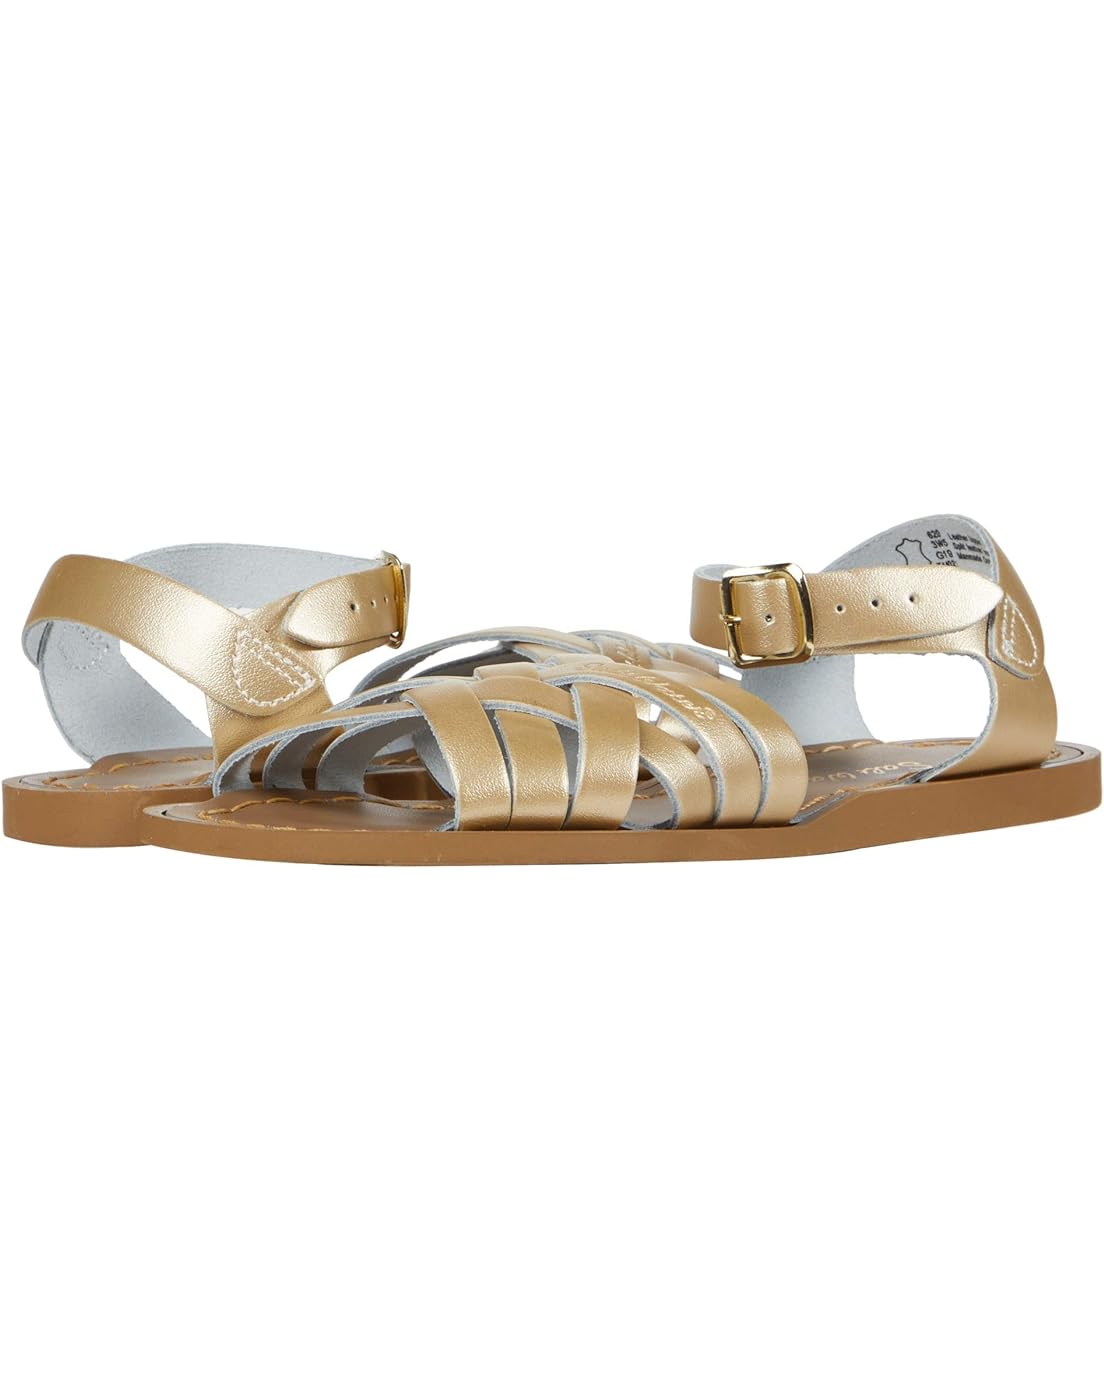 Salt Water Sandal by Hoy Shoes Retro (Toddler/Little Kid)